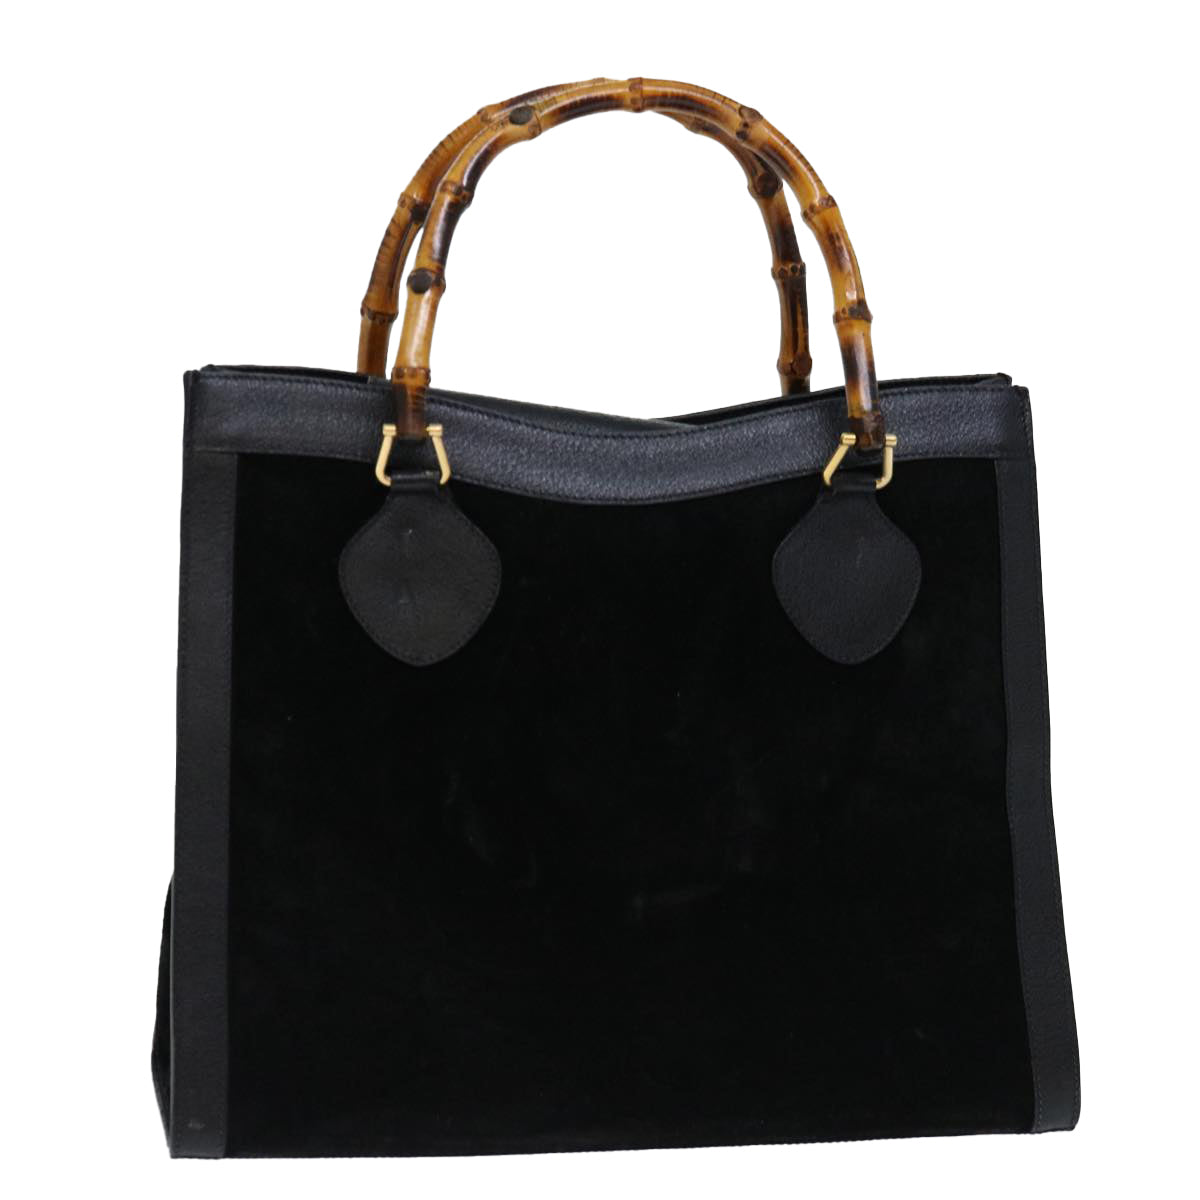 GUCCI Bamboo Tote Bag Suede Black 002 1186 0260 Auth 66947